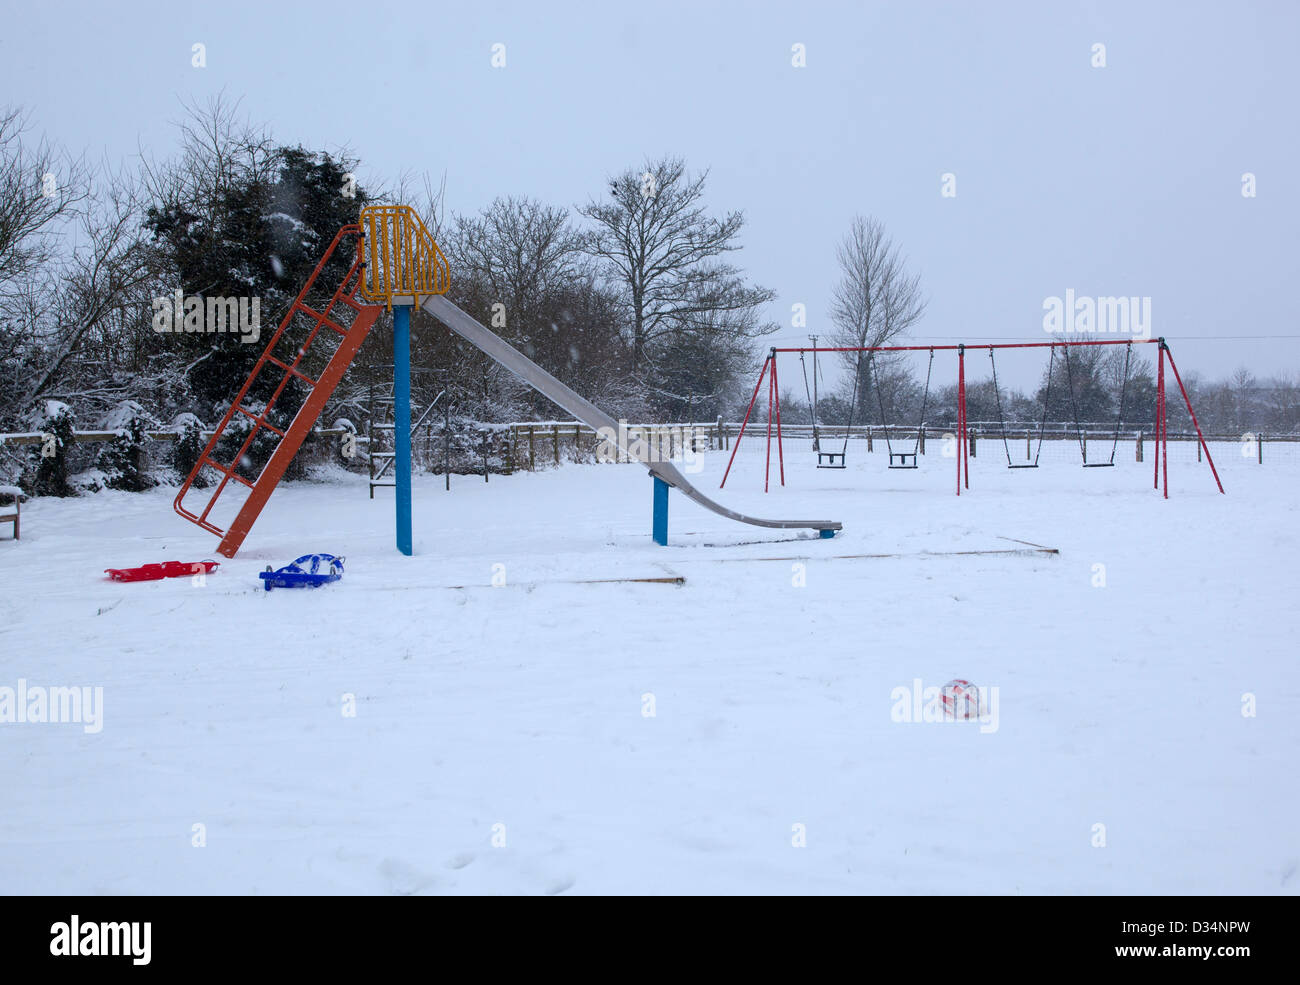 Childrens Playground in the Snow Stock Photo